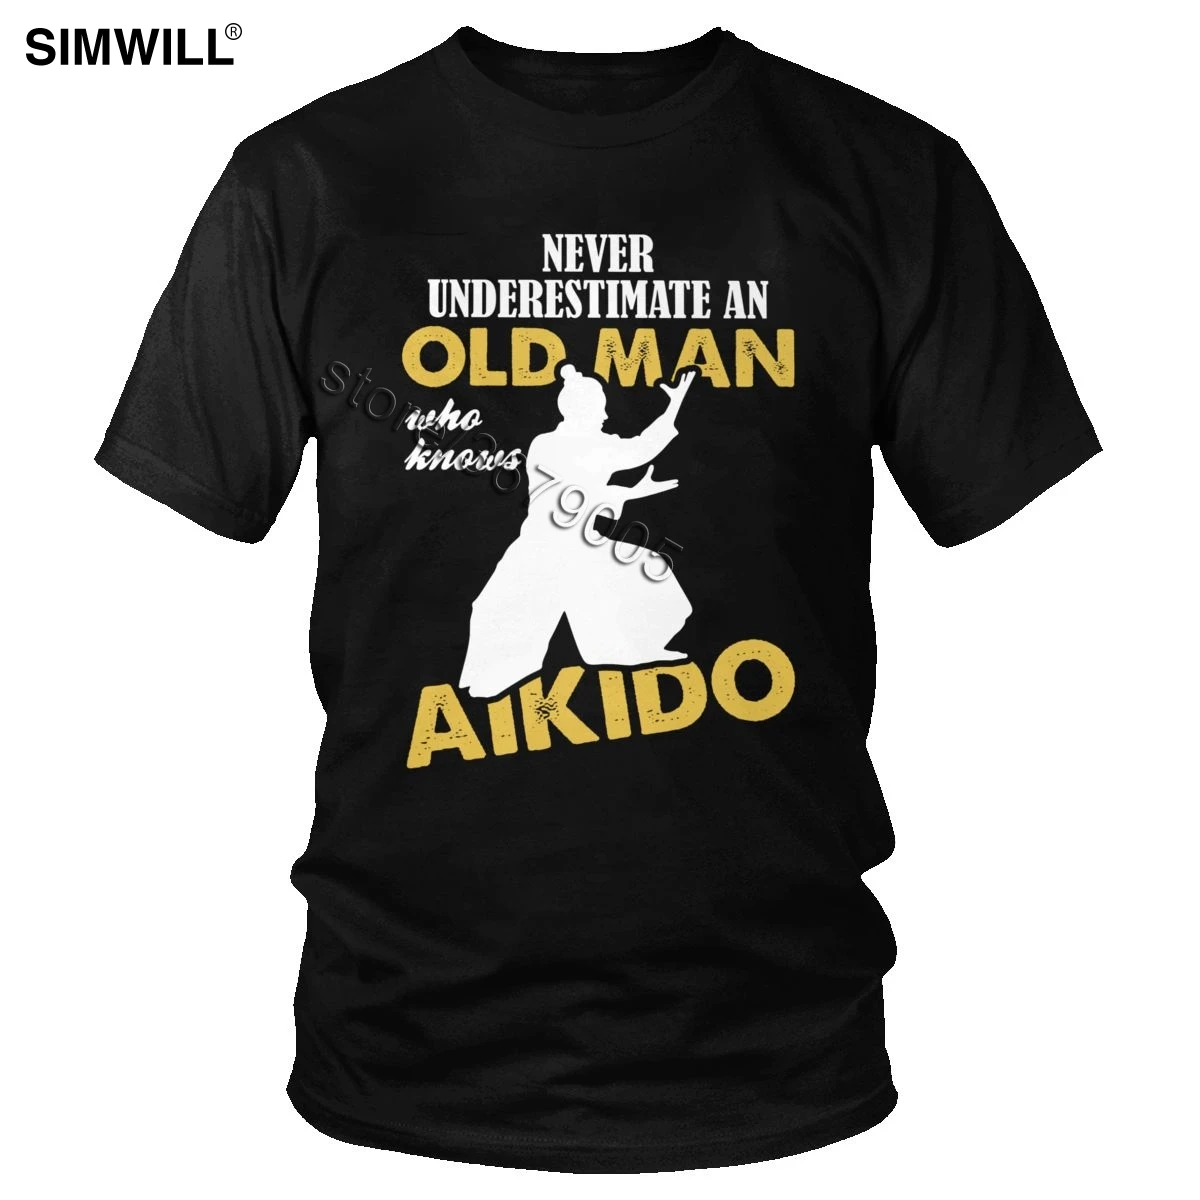 

Never Underestimate An Old Man Who Knows Aikido T Shirt for Men Cotton Tee Short Sleeved O-neck T-Shirt Print Regular Fit Tshirt